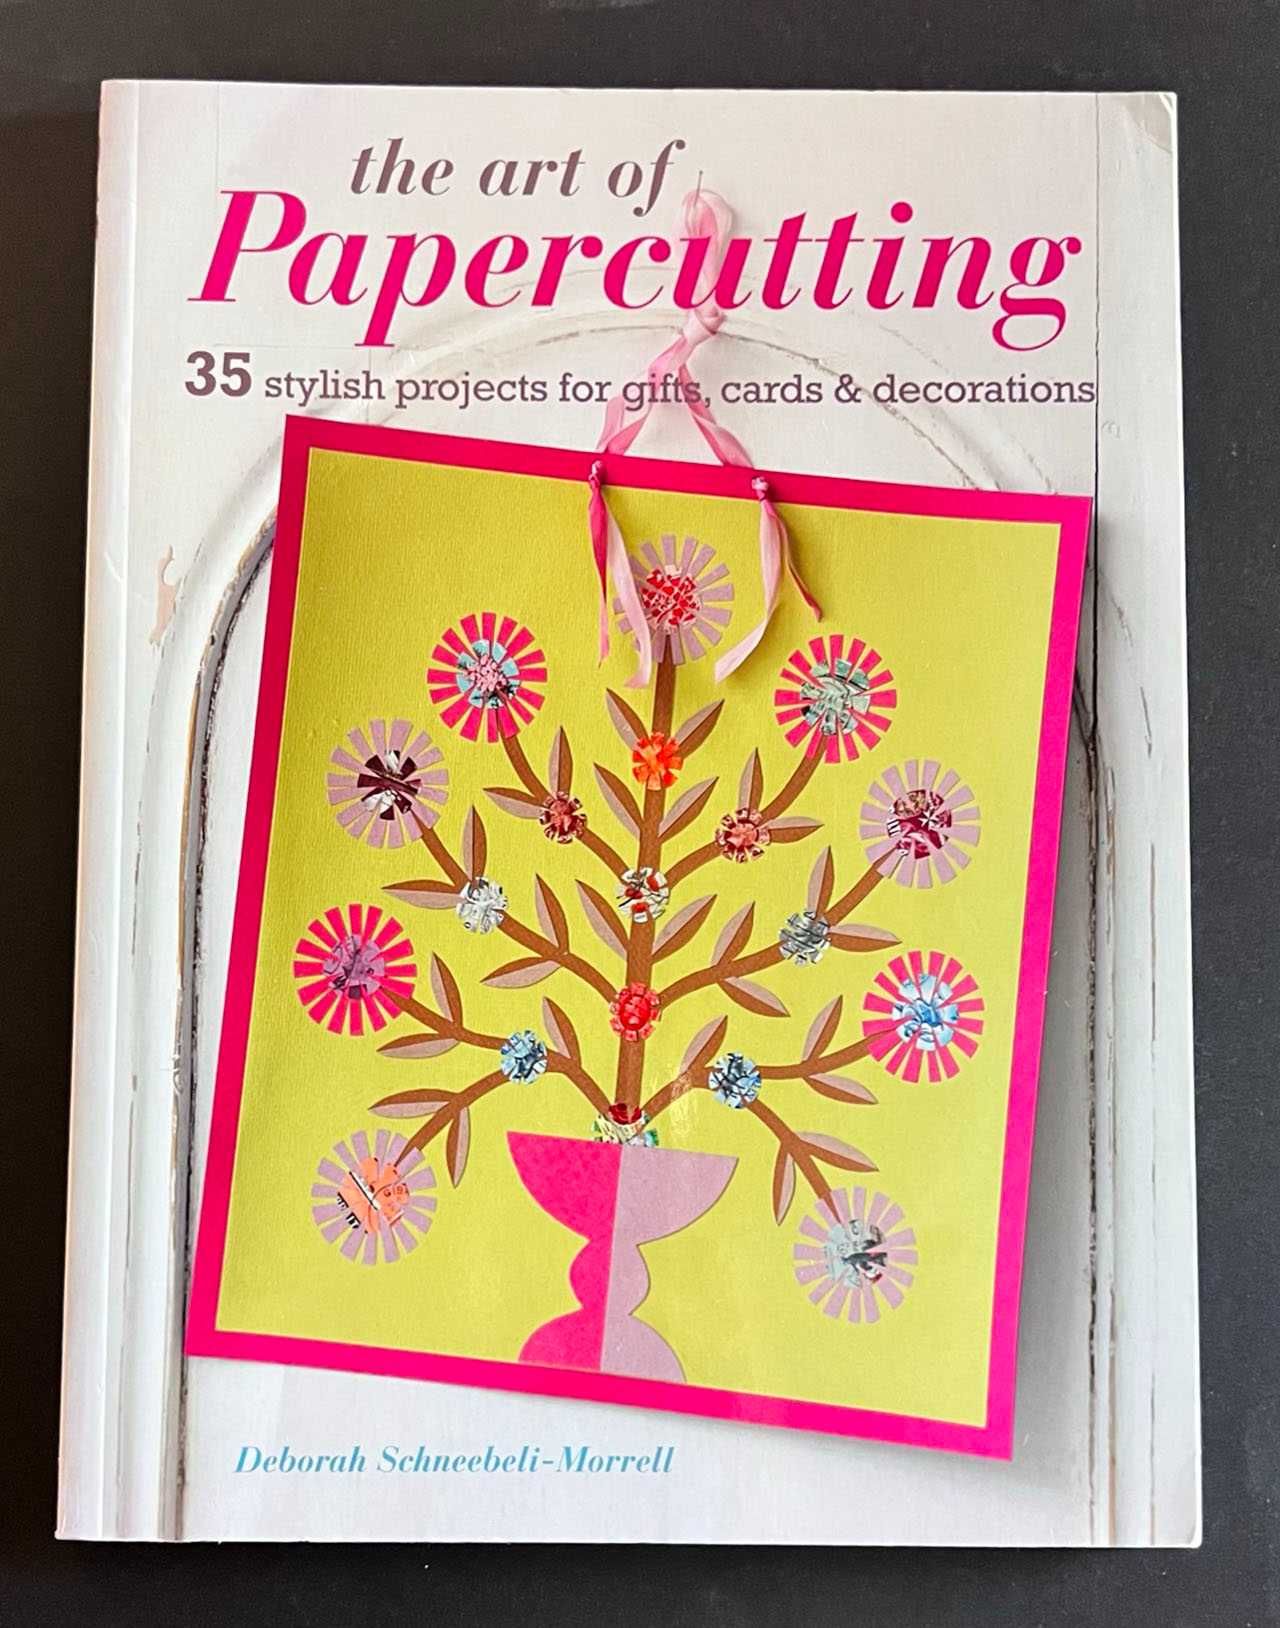 The Art of Papercrafting LIVRO